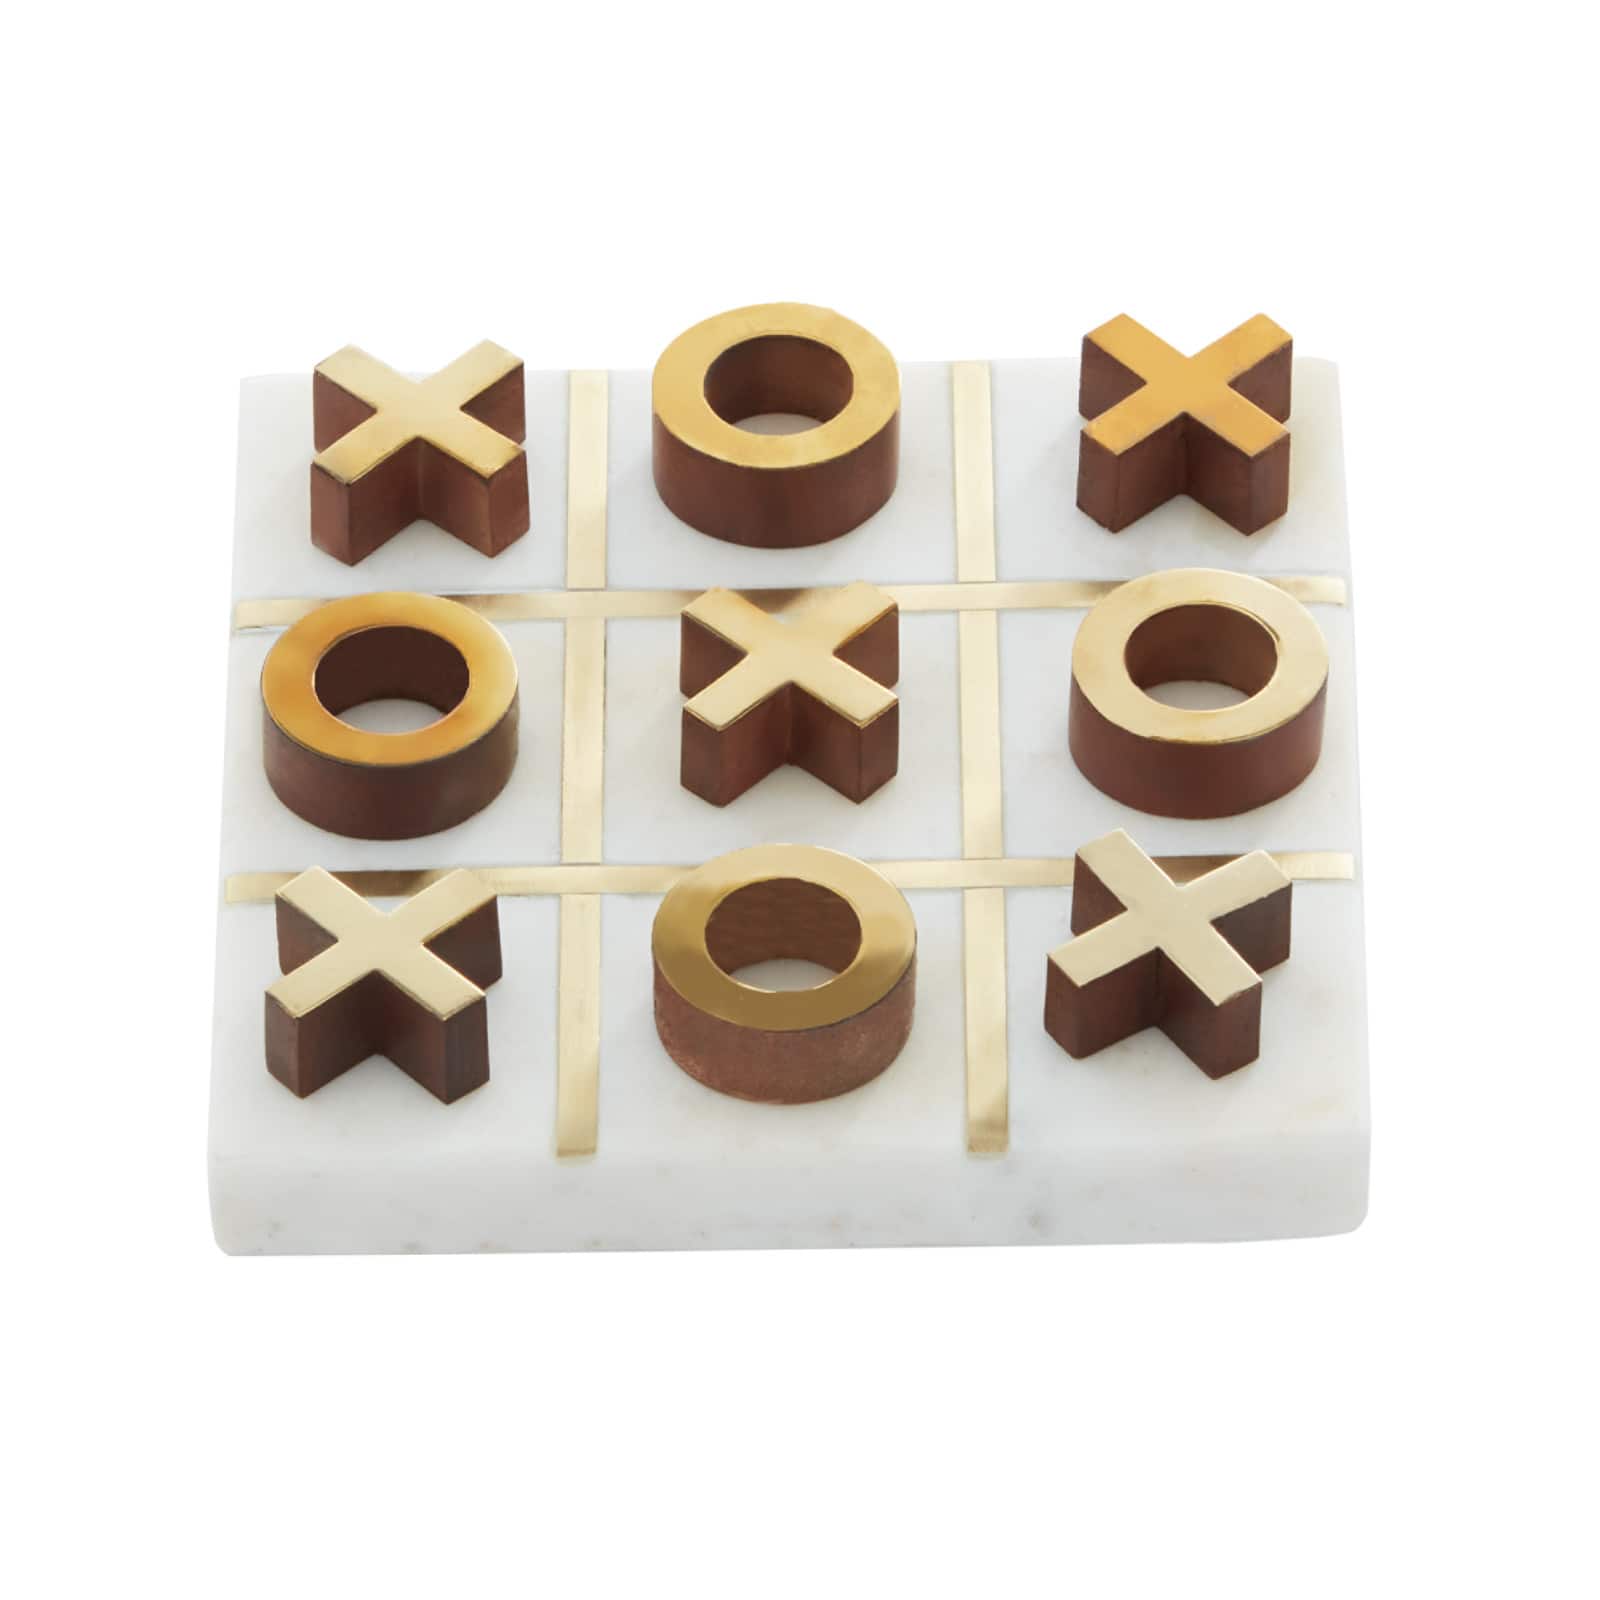 Green and White Marble Tic Tac Toe - Magnolia